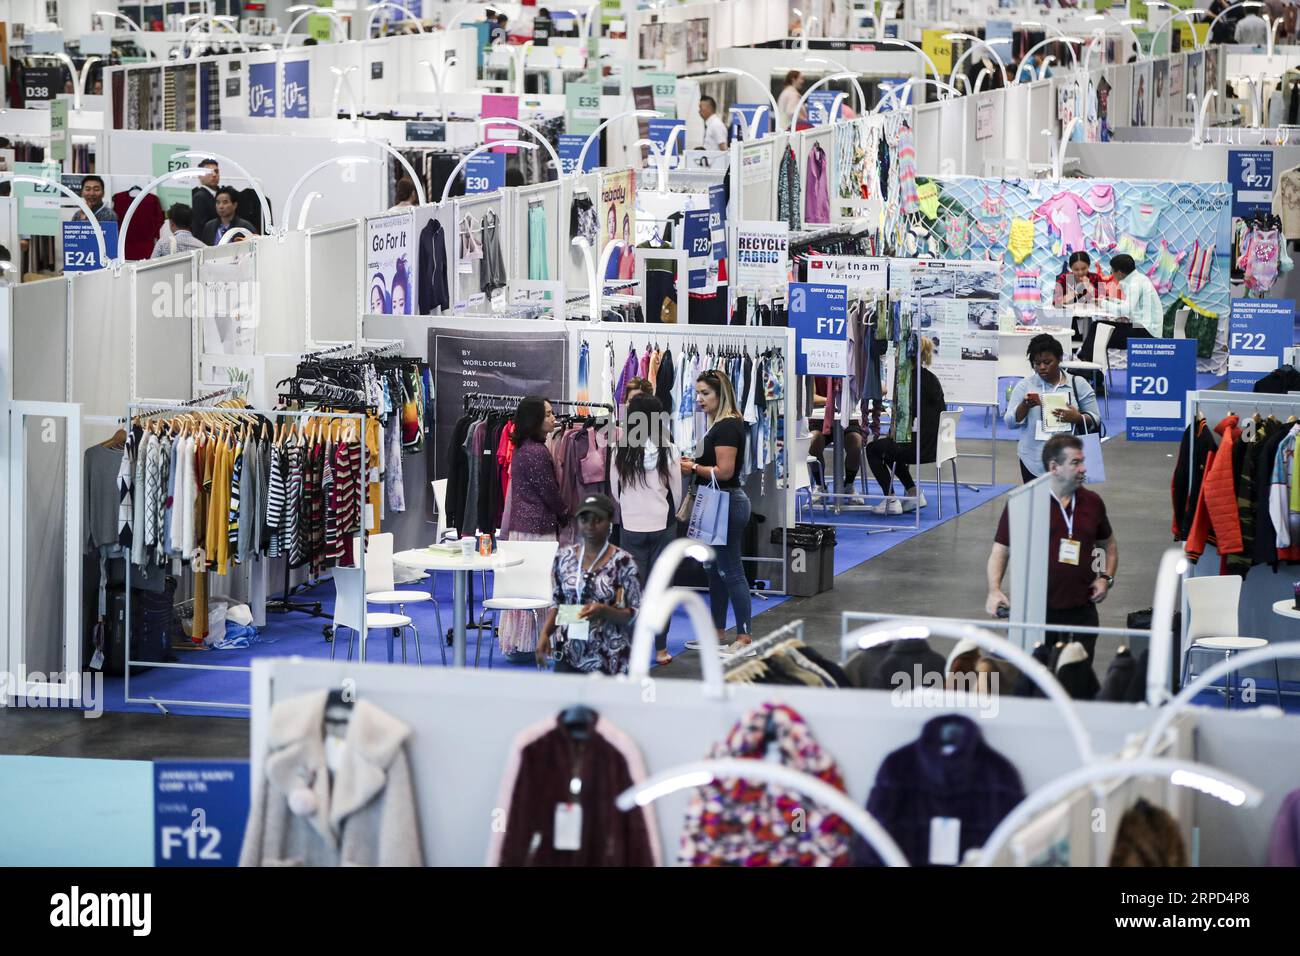 (190722) -- NEW YORK, July 22, 2019 -- People visit the 20th China Textile and Apparel Trade Show in New York, the United States, July 22, 2019. The 20th China Textile and Apparel Trade Show in New York opened on Monday in Manhattan s Javits Center, serving as a platform to showcase the latest industrial trends and help Chinese companies explore the U.S. market. Over 500 Chinese garment, fabric and textile companies are attending this year s trade show, which will run through Wednesday. Another 300 or so companies from 16 countries and regions also joined the show with an exhibition area of 30 Stock Photo